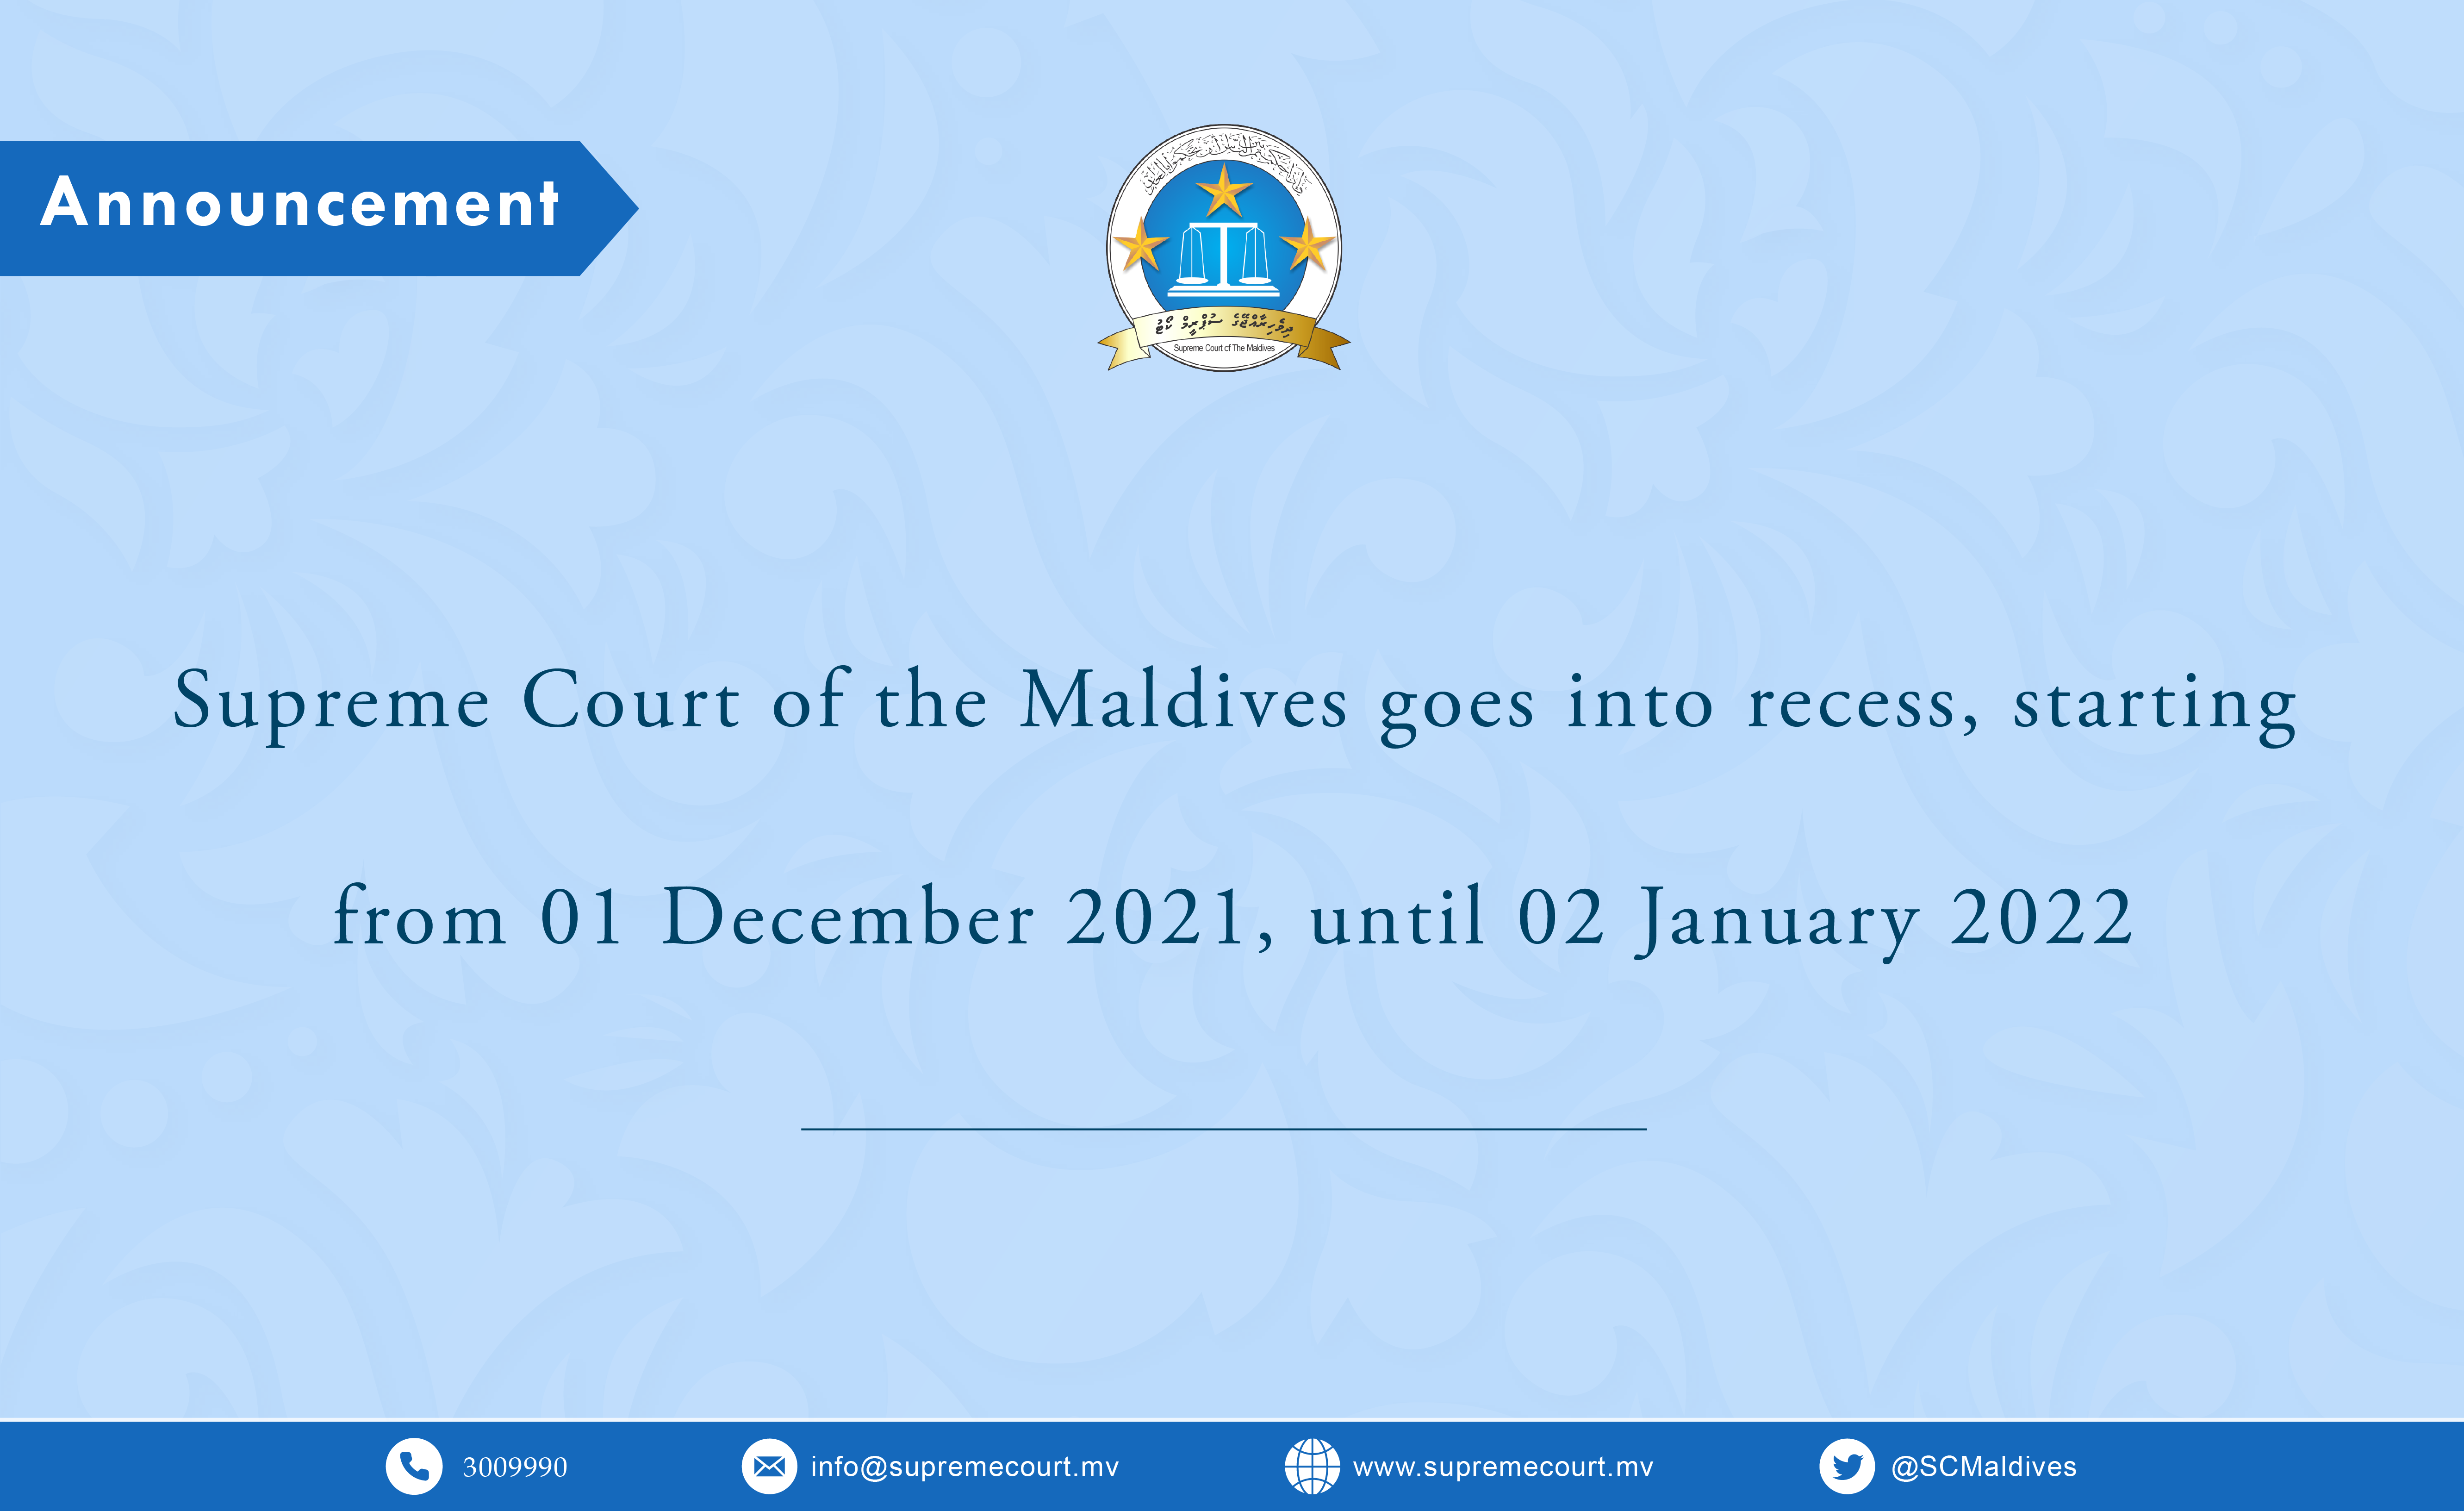 Supreme Court Goes into Recess, Starting 01 December 2021